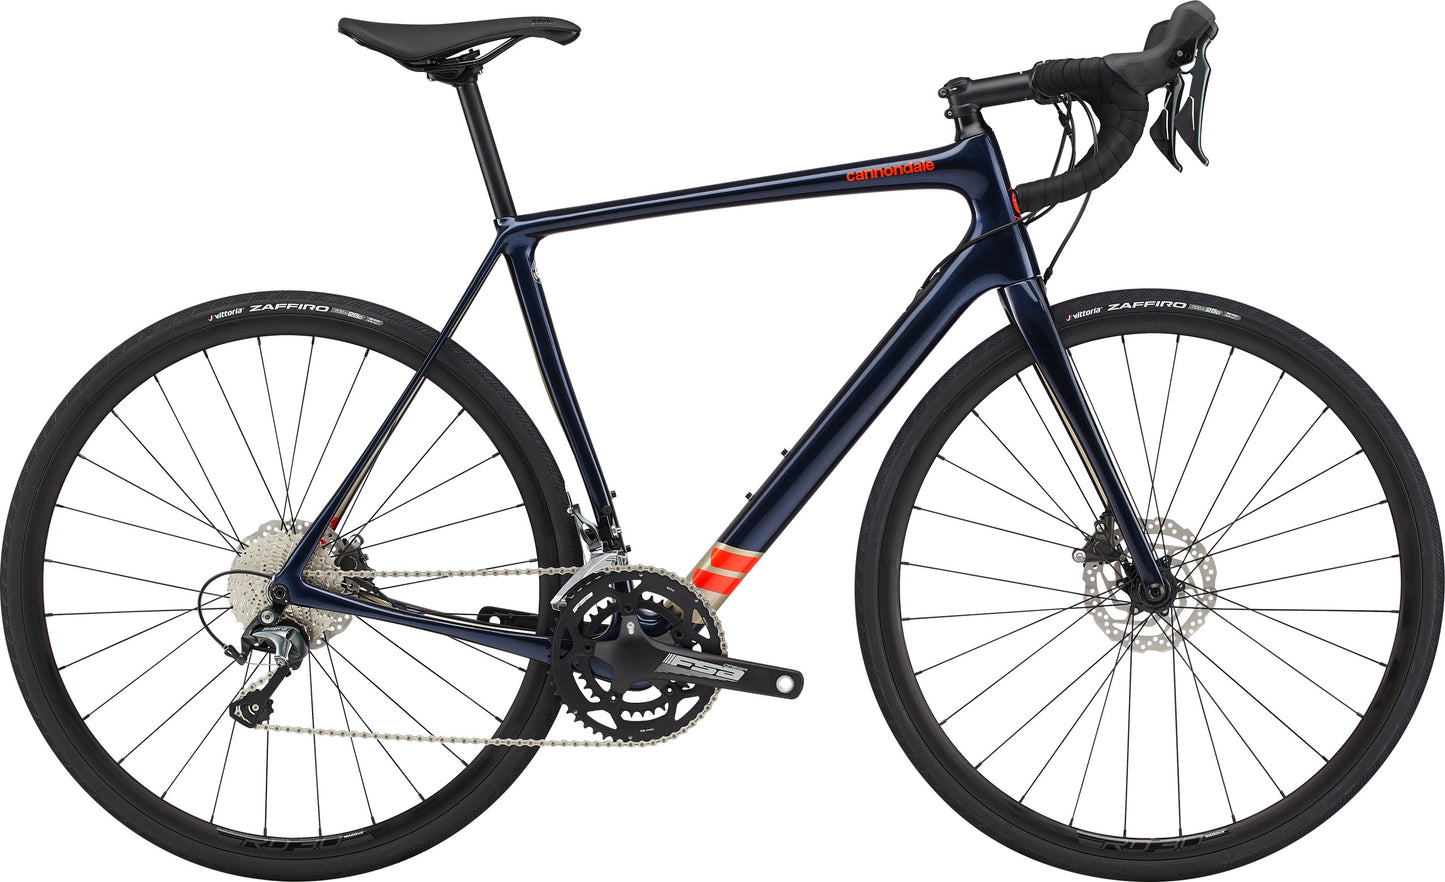 2021 Cannondale 700 M Synapse Crb Disc Tgra